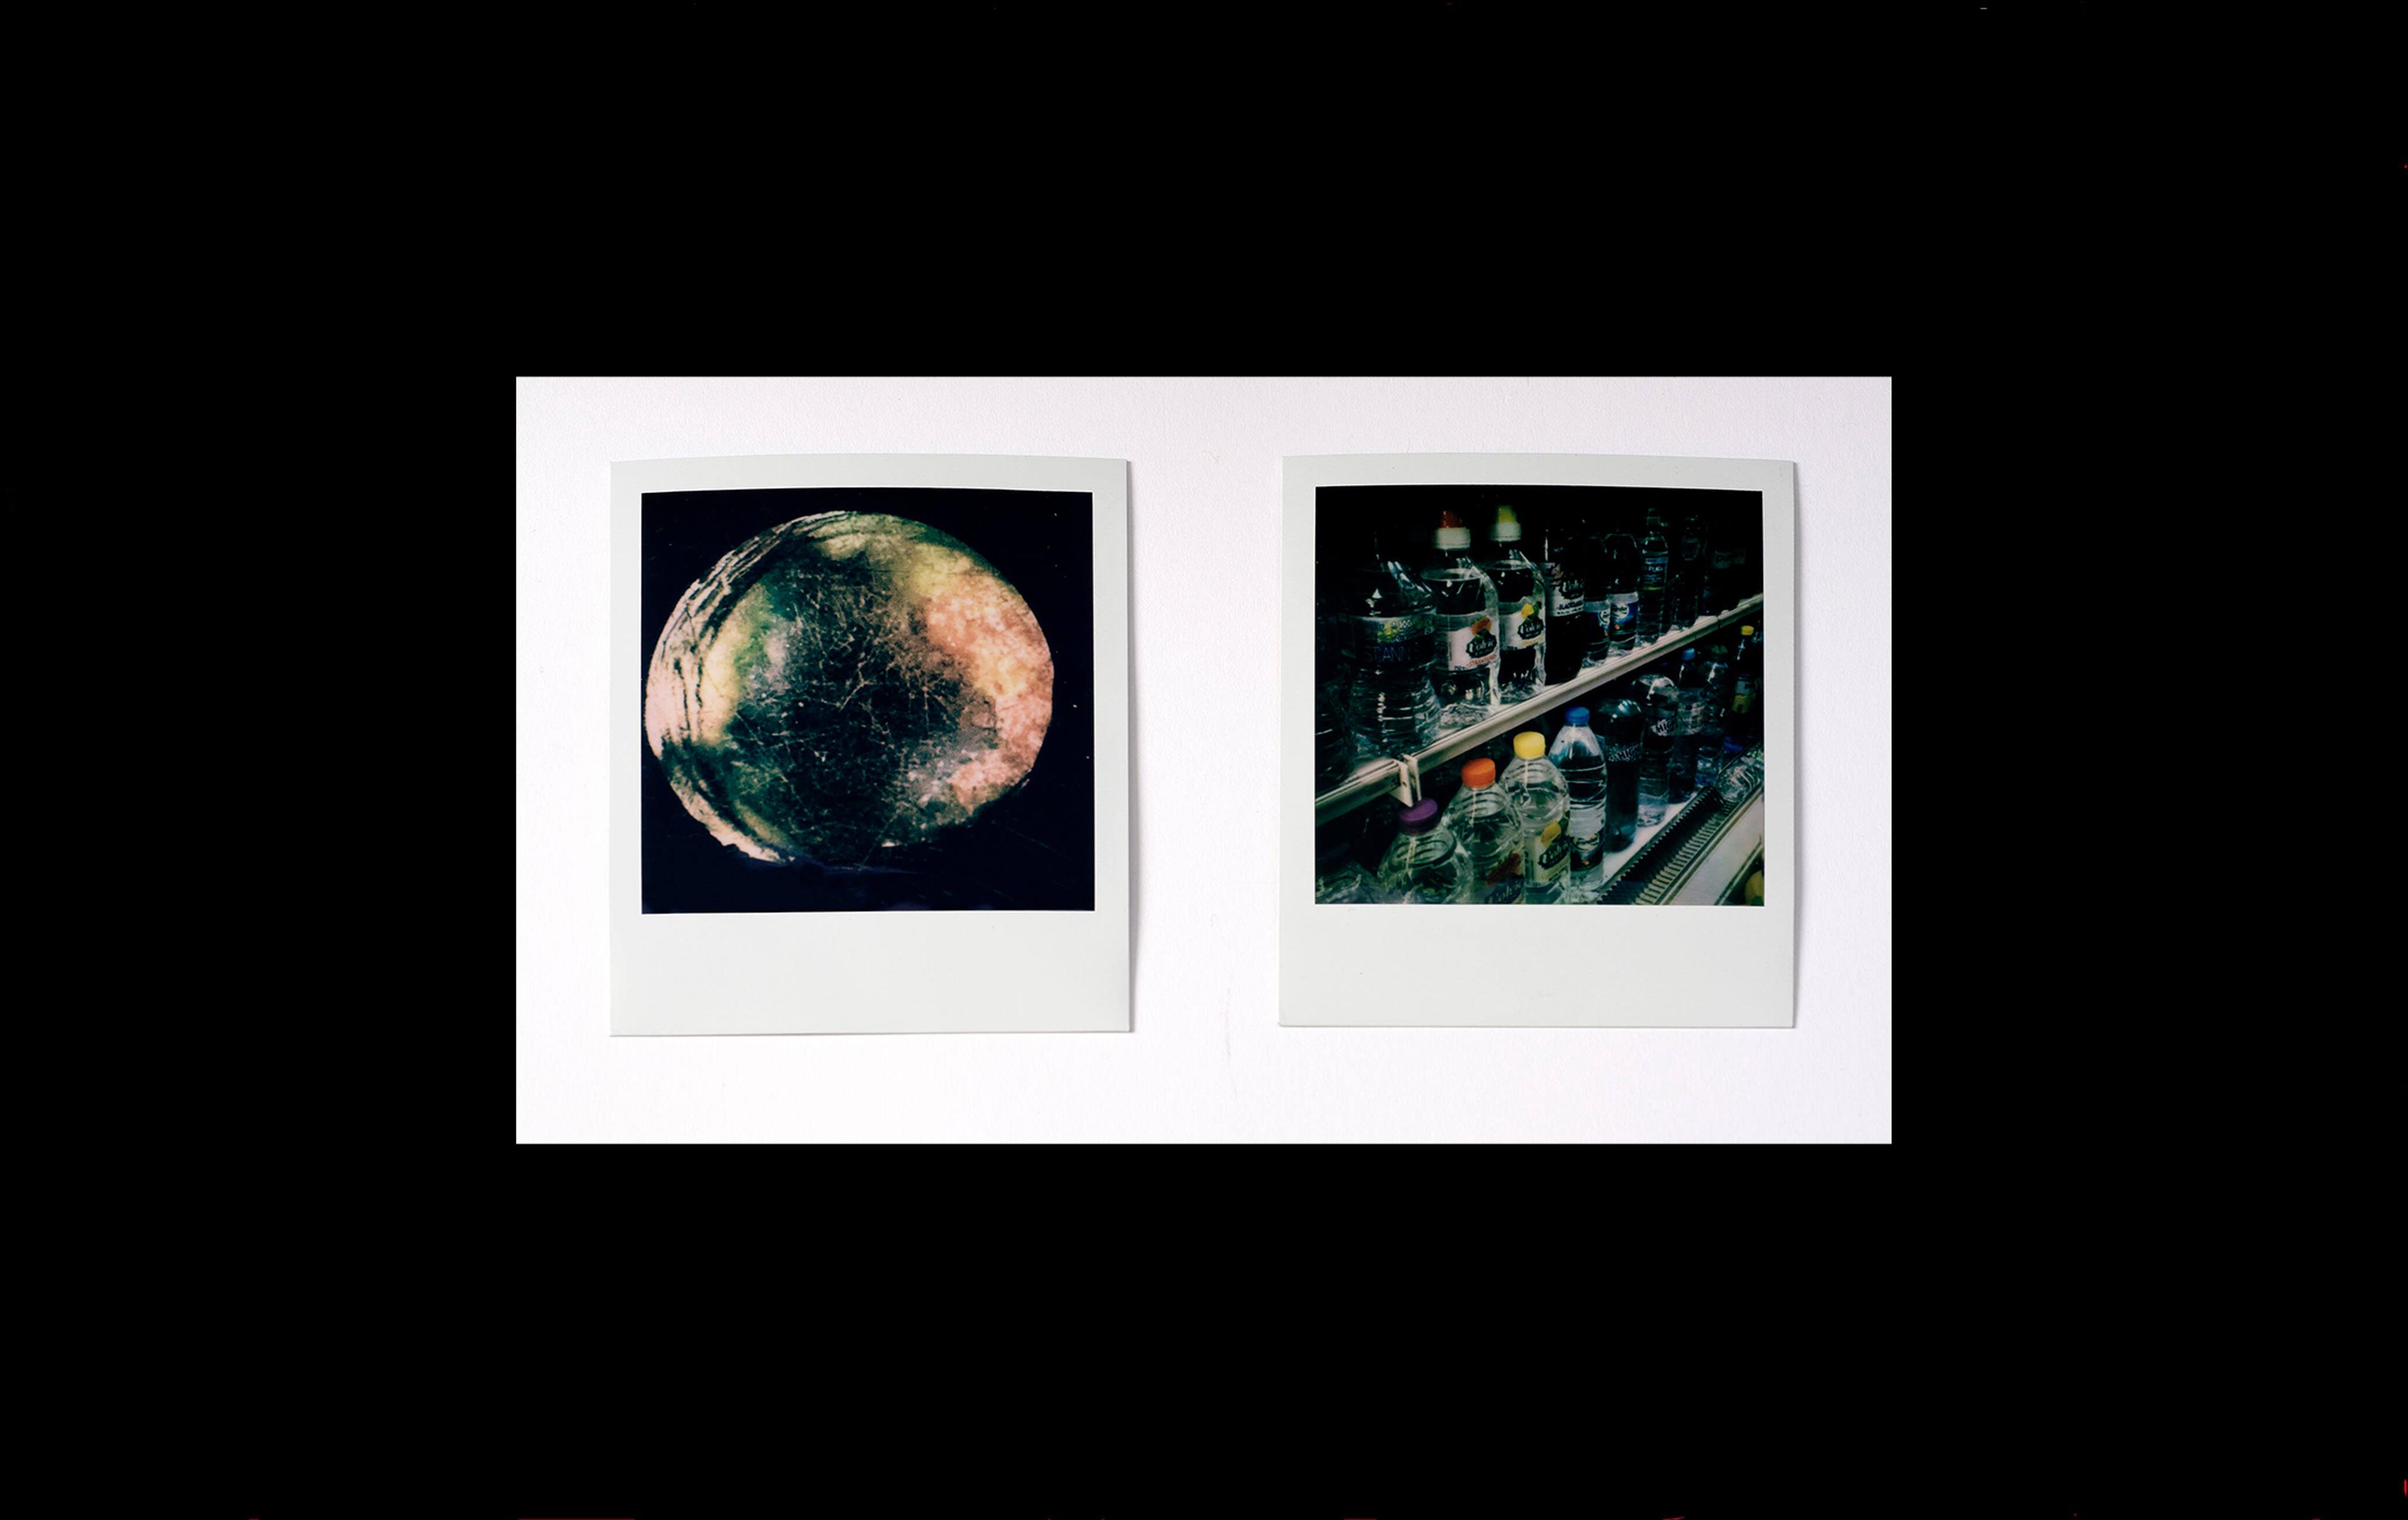 Two poloroid photographs, one of a moon-like well from above and one of a shop fridge filled with bottles of water